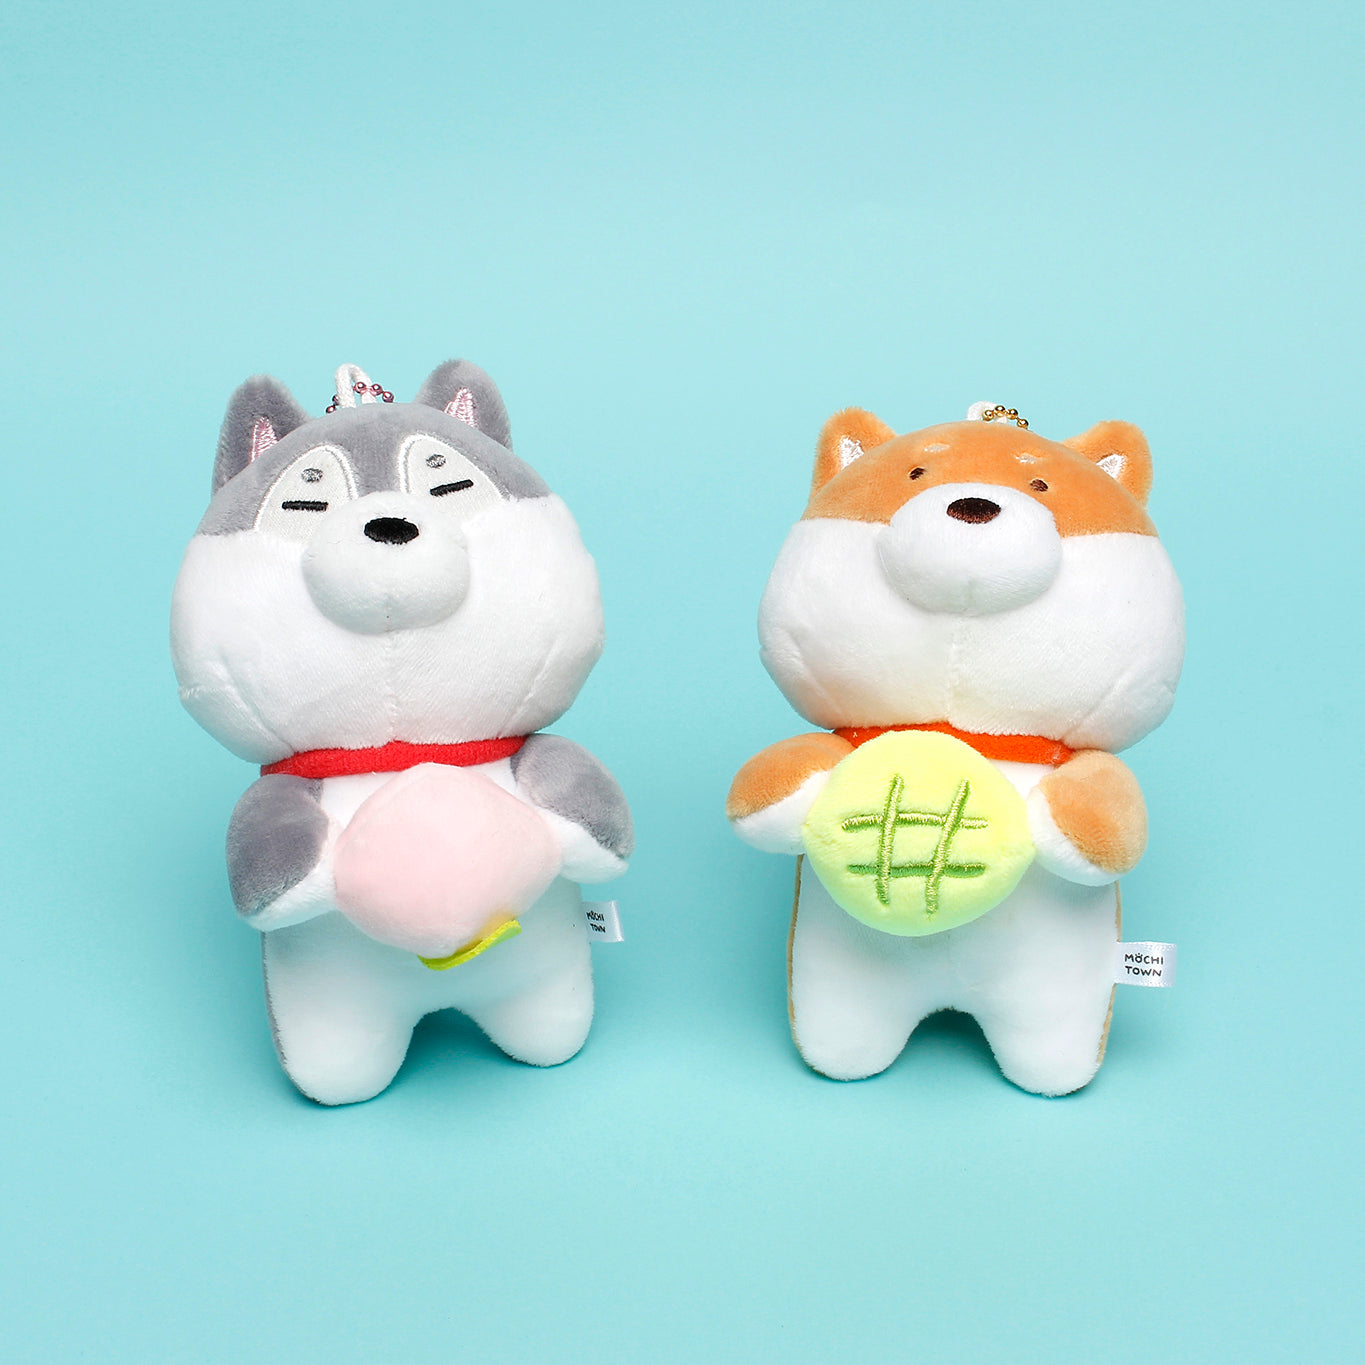 Two keyring dogs sit together on teal background.